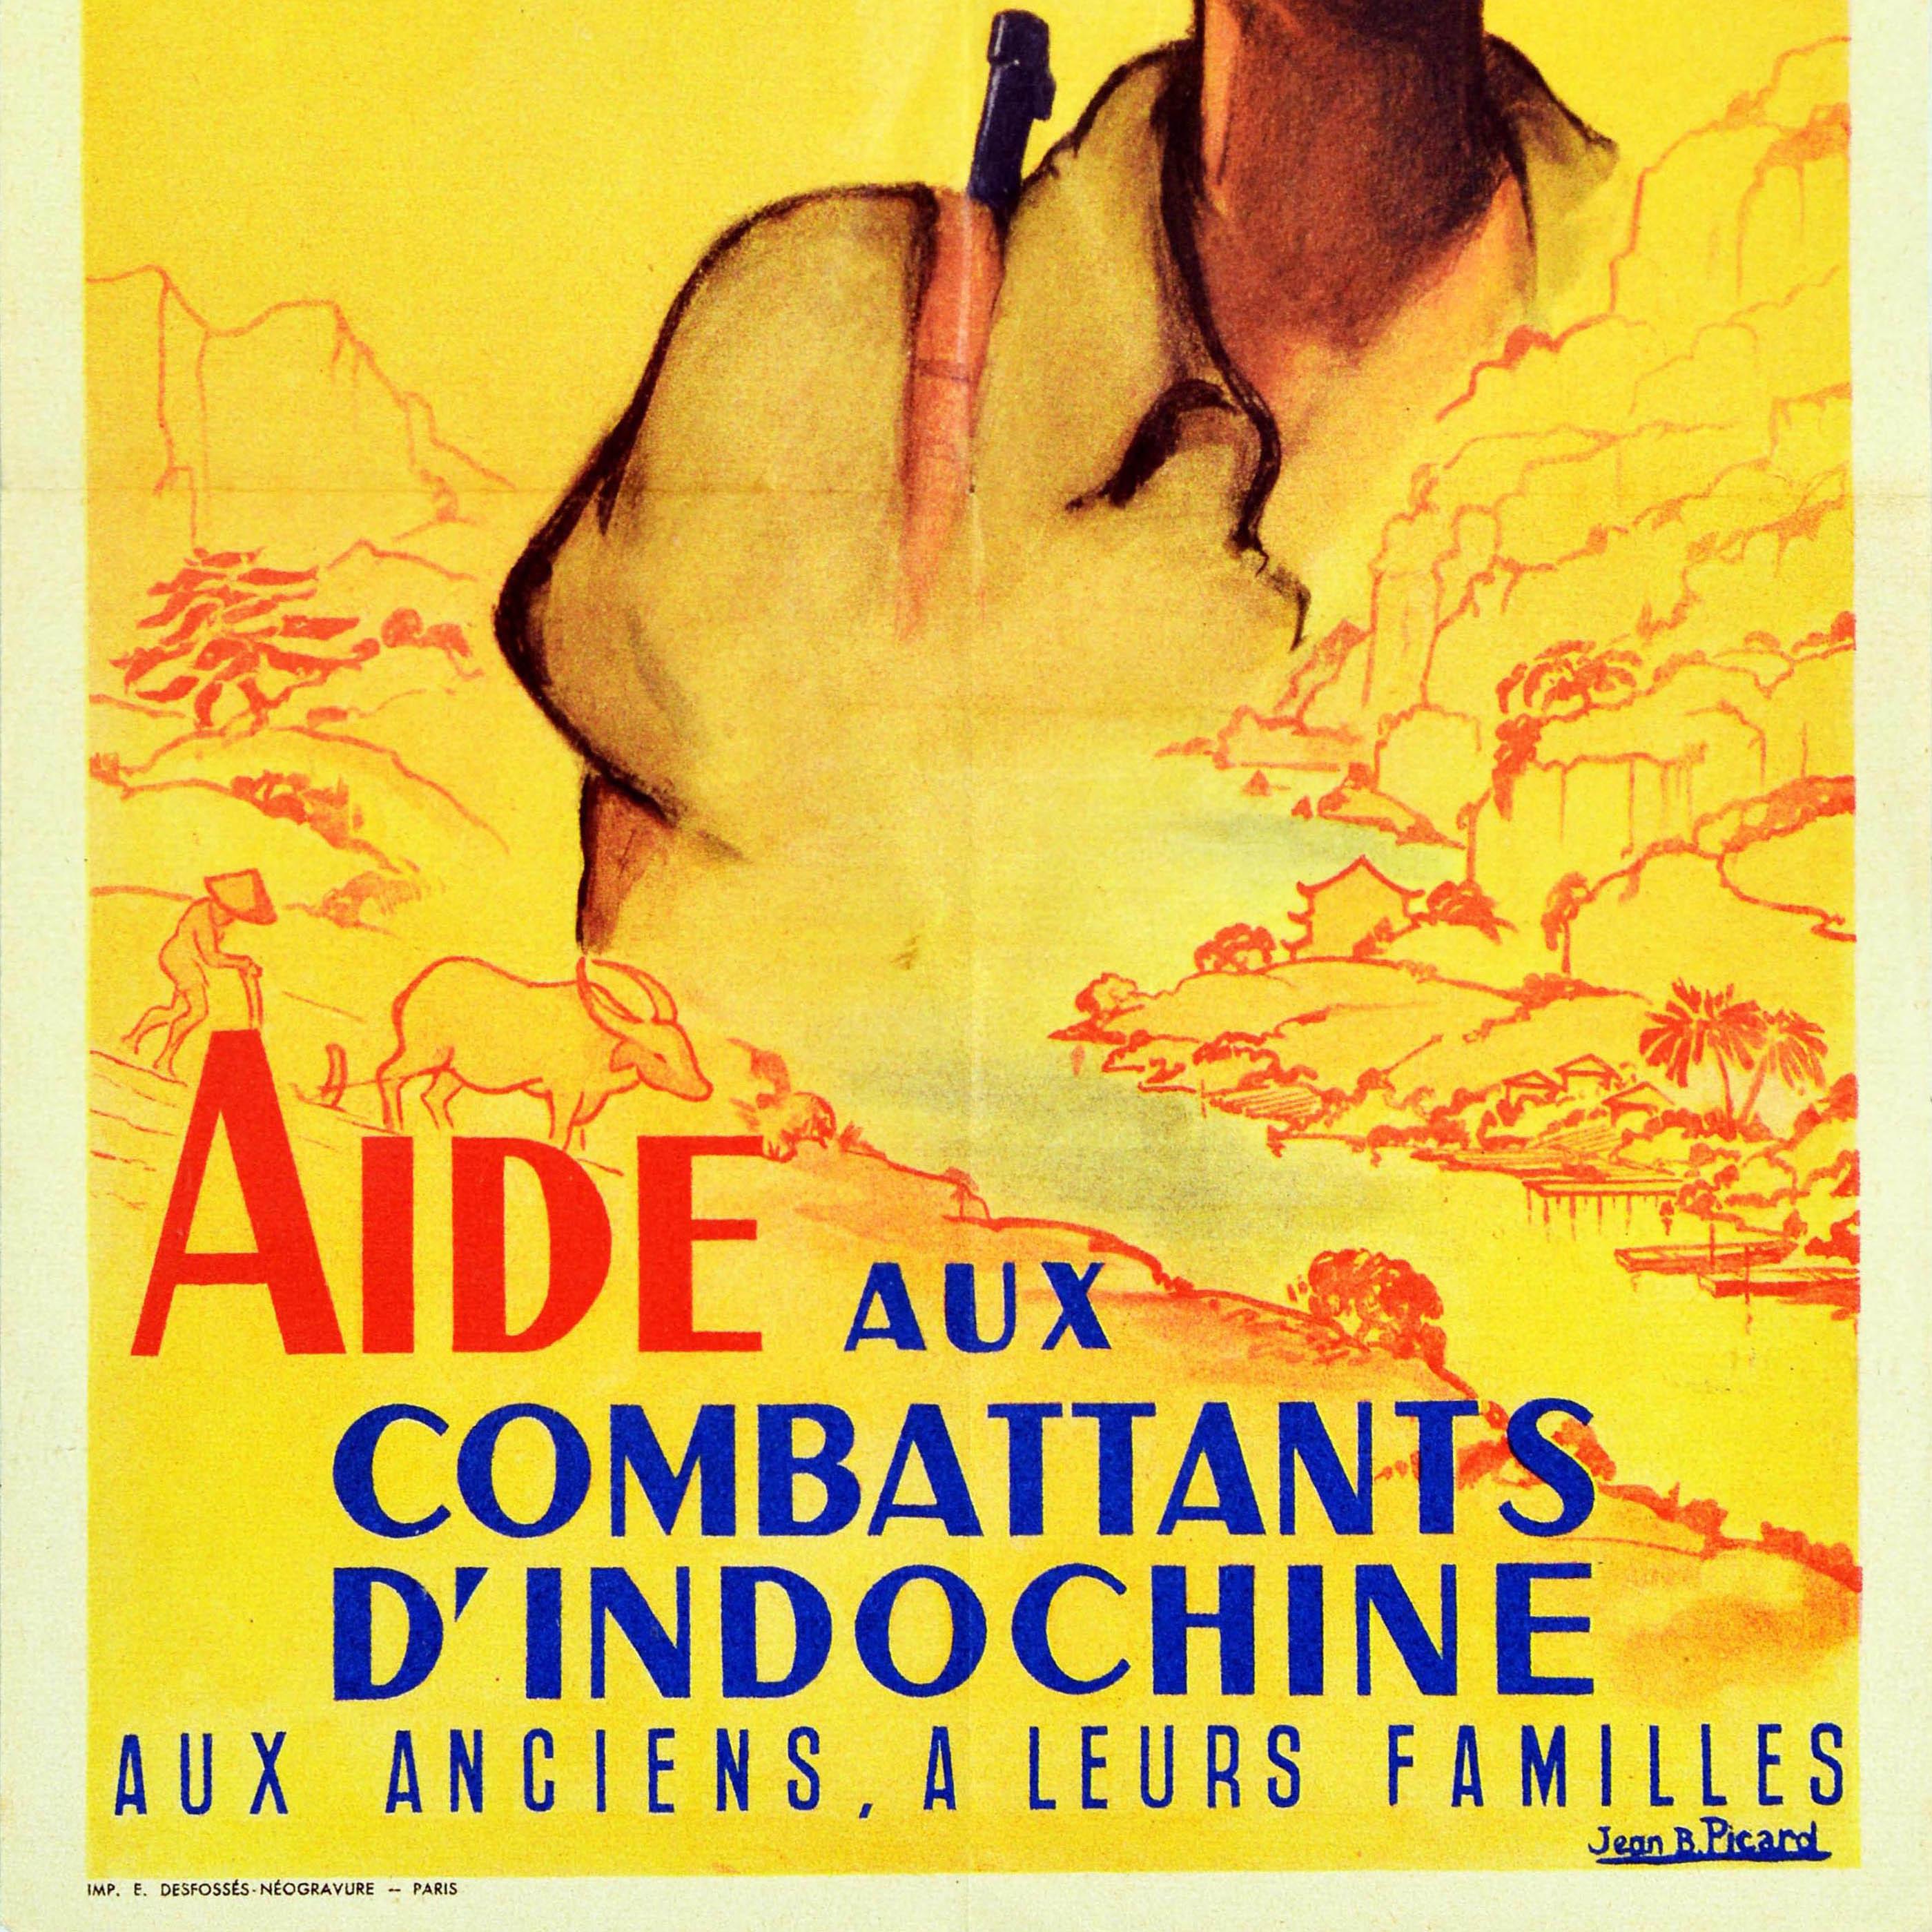 Original vintage poster - Aide Aux Combattants D'Indochine Aux Anciens, a leurs familles / Aid to Indochina combatants To the elderly, to their families - featuring a soldier armed with a rifle gun over his shoulder against a yellow background with